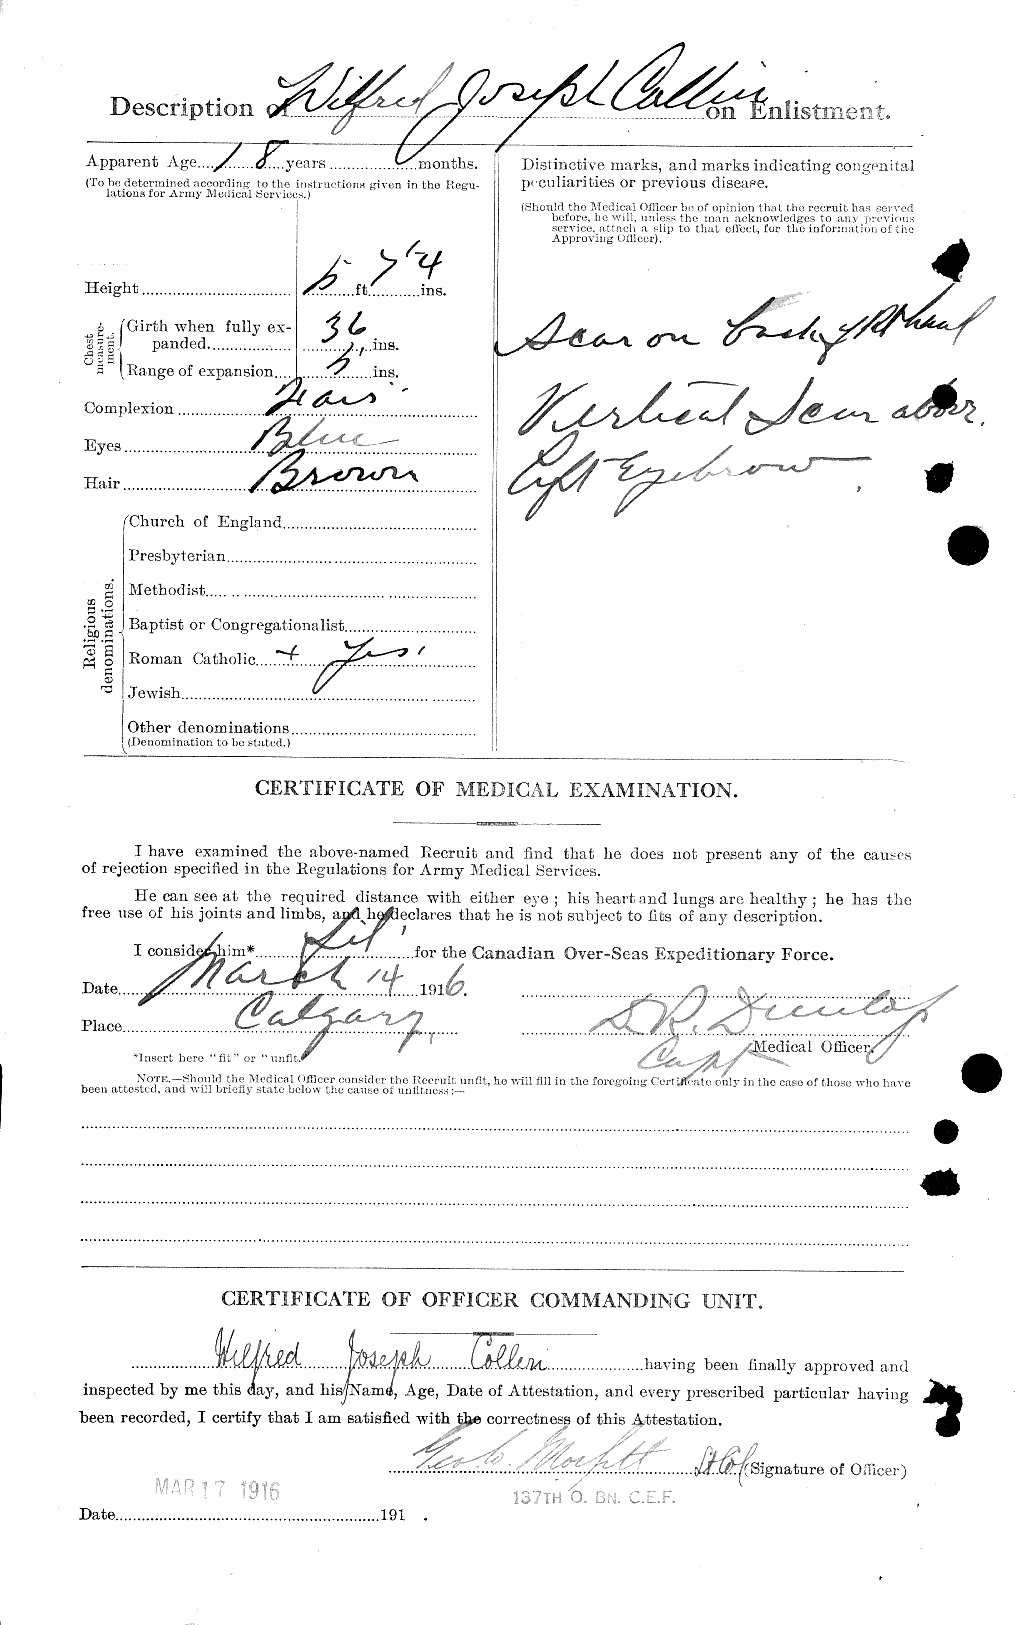 Personnel Records of the First World War - CEF 040704b